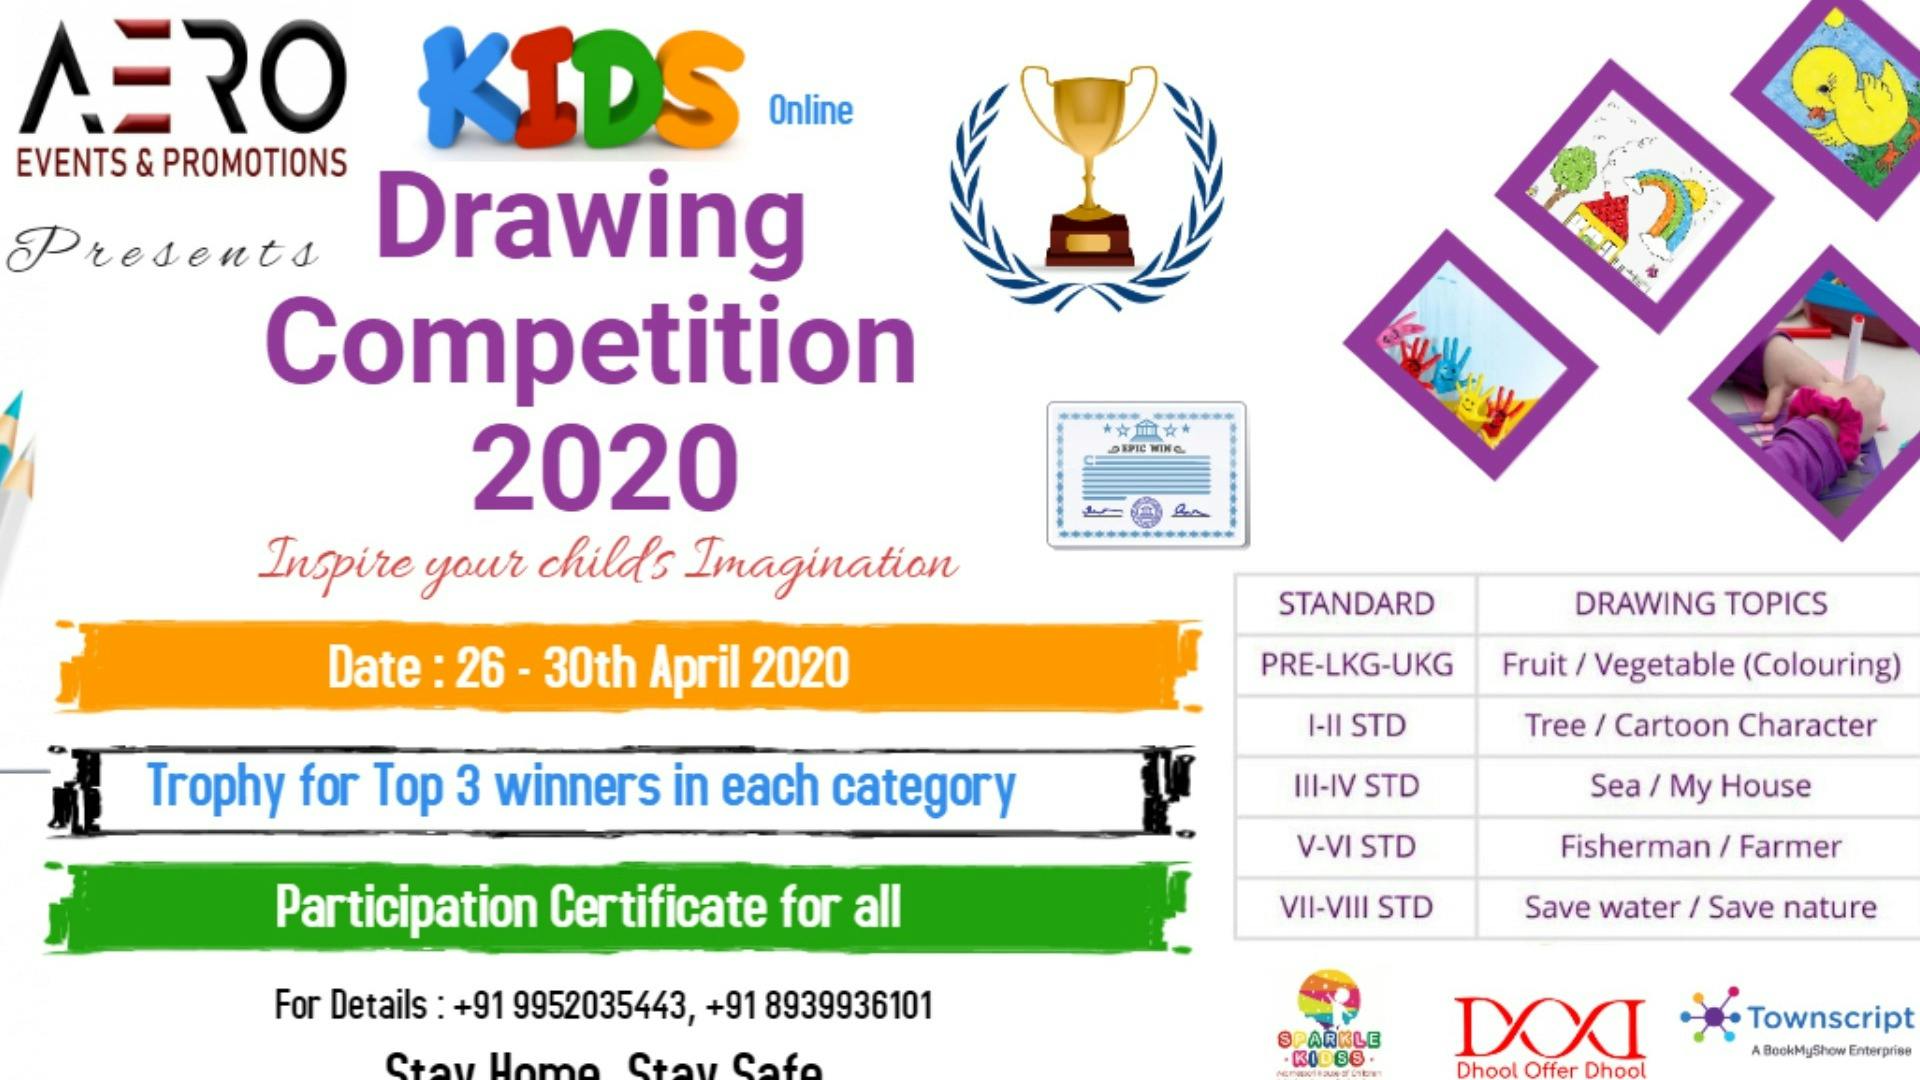 Drawing Competition in velachery - Pencil Park School of Arts